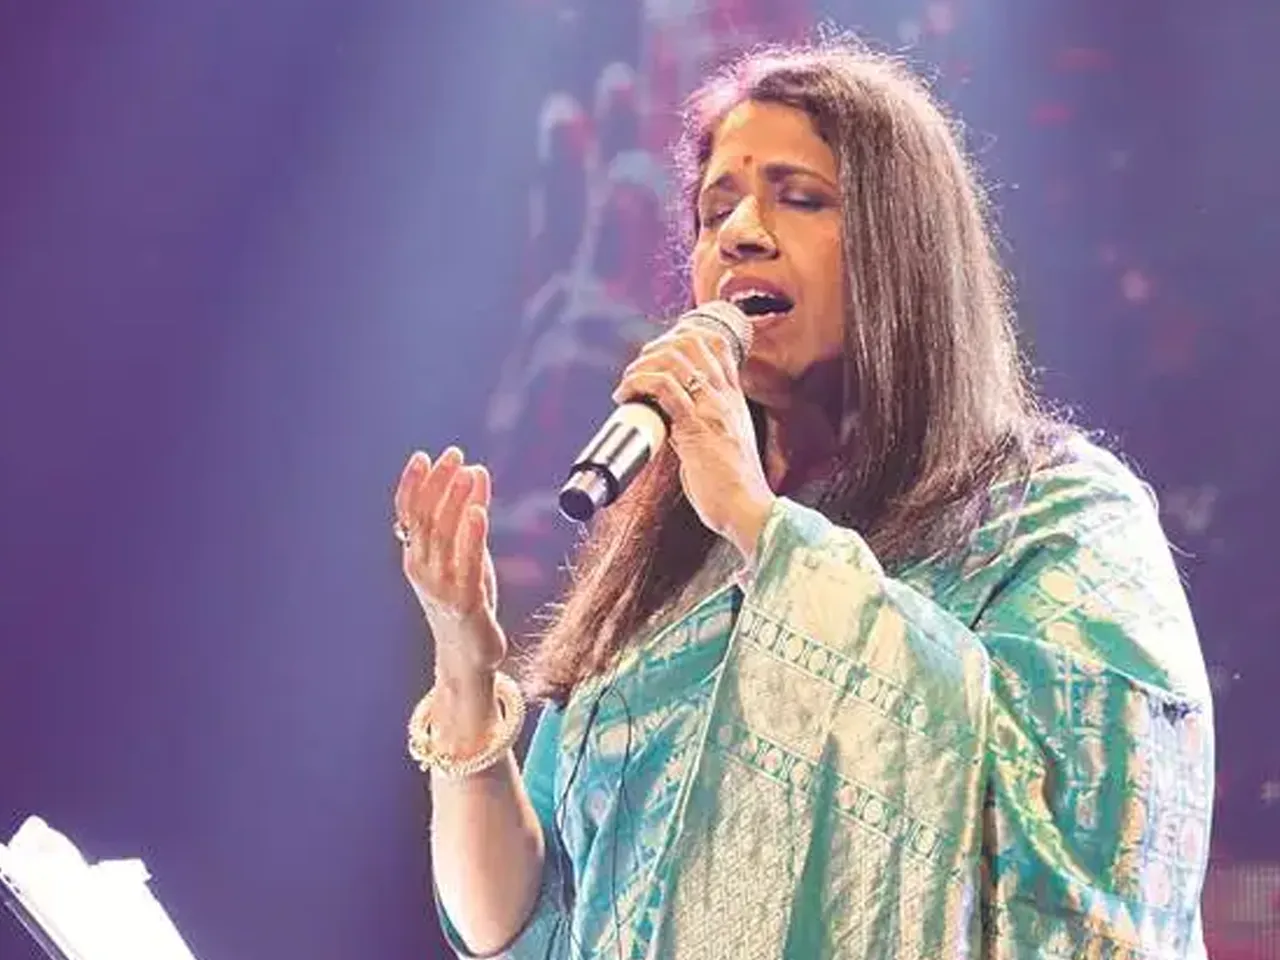 15 iconic songs by Kavita Krishnamurthy that we just can’t have enough of!